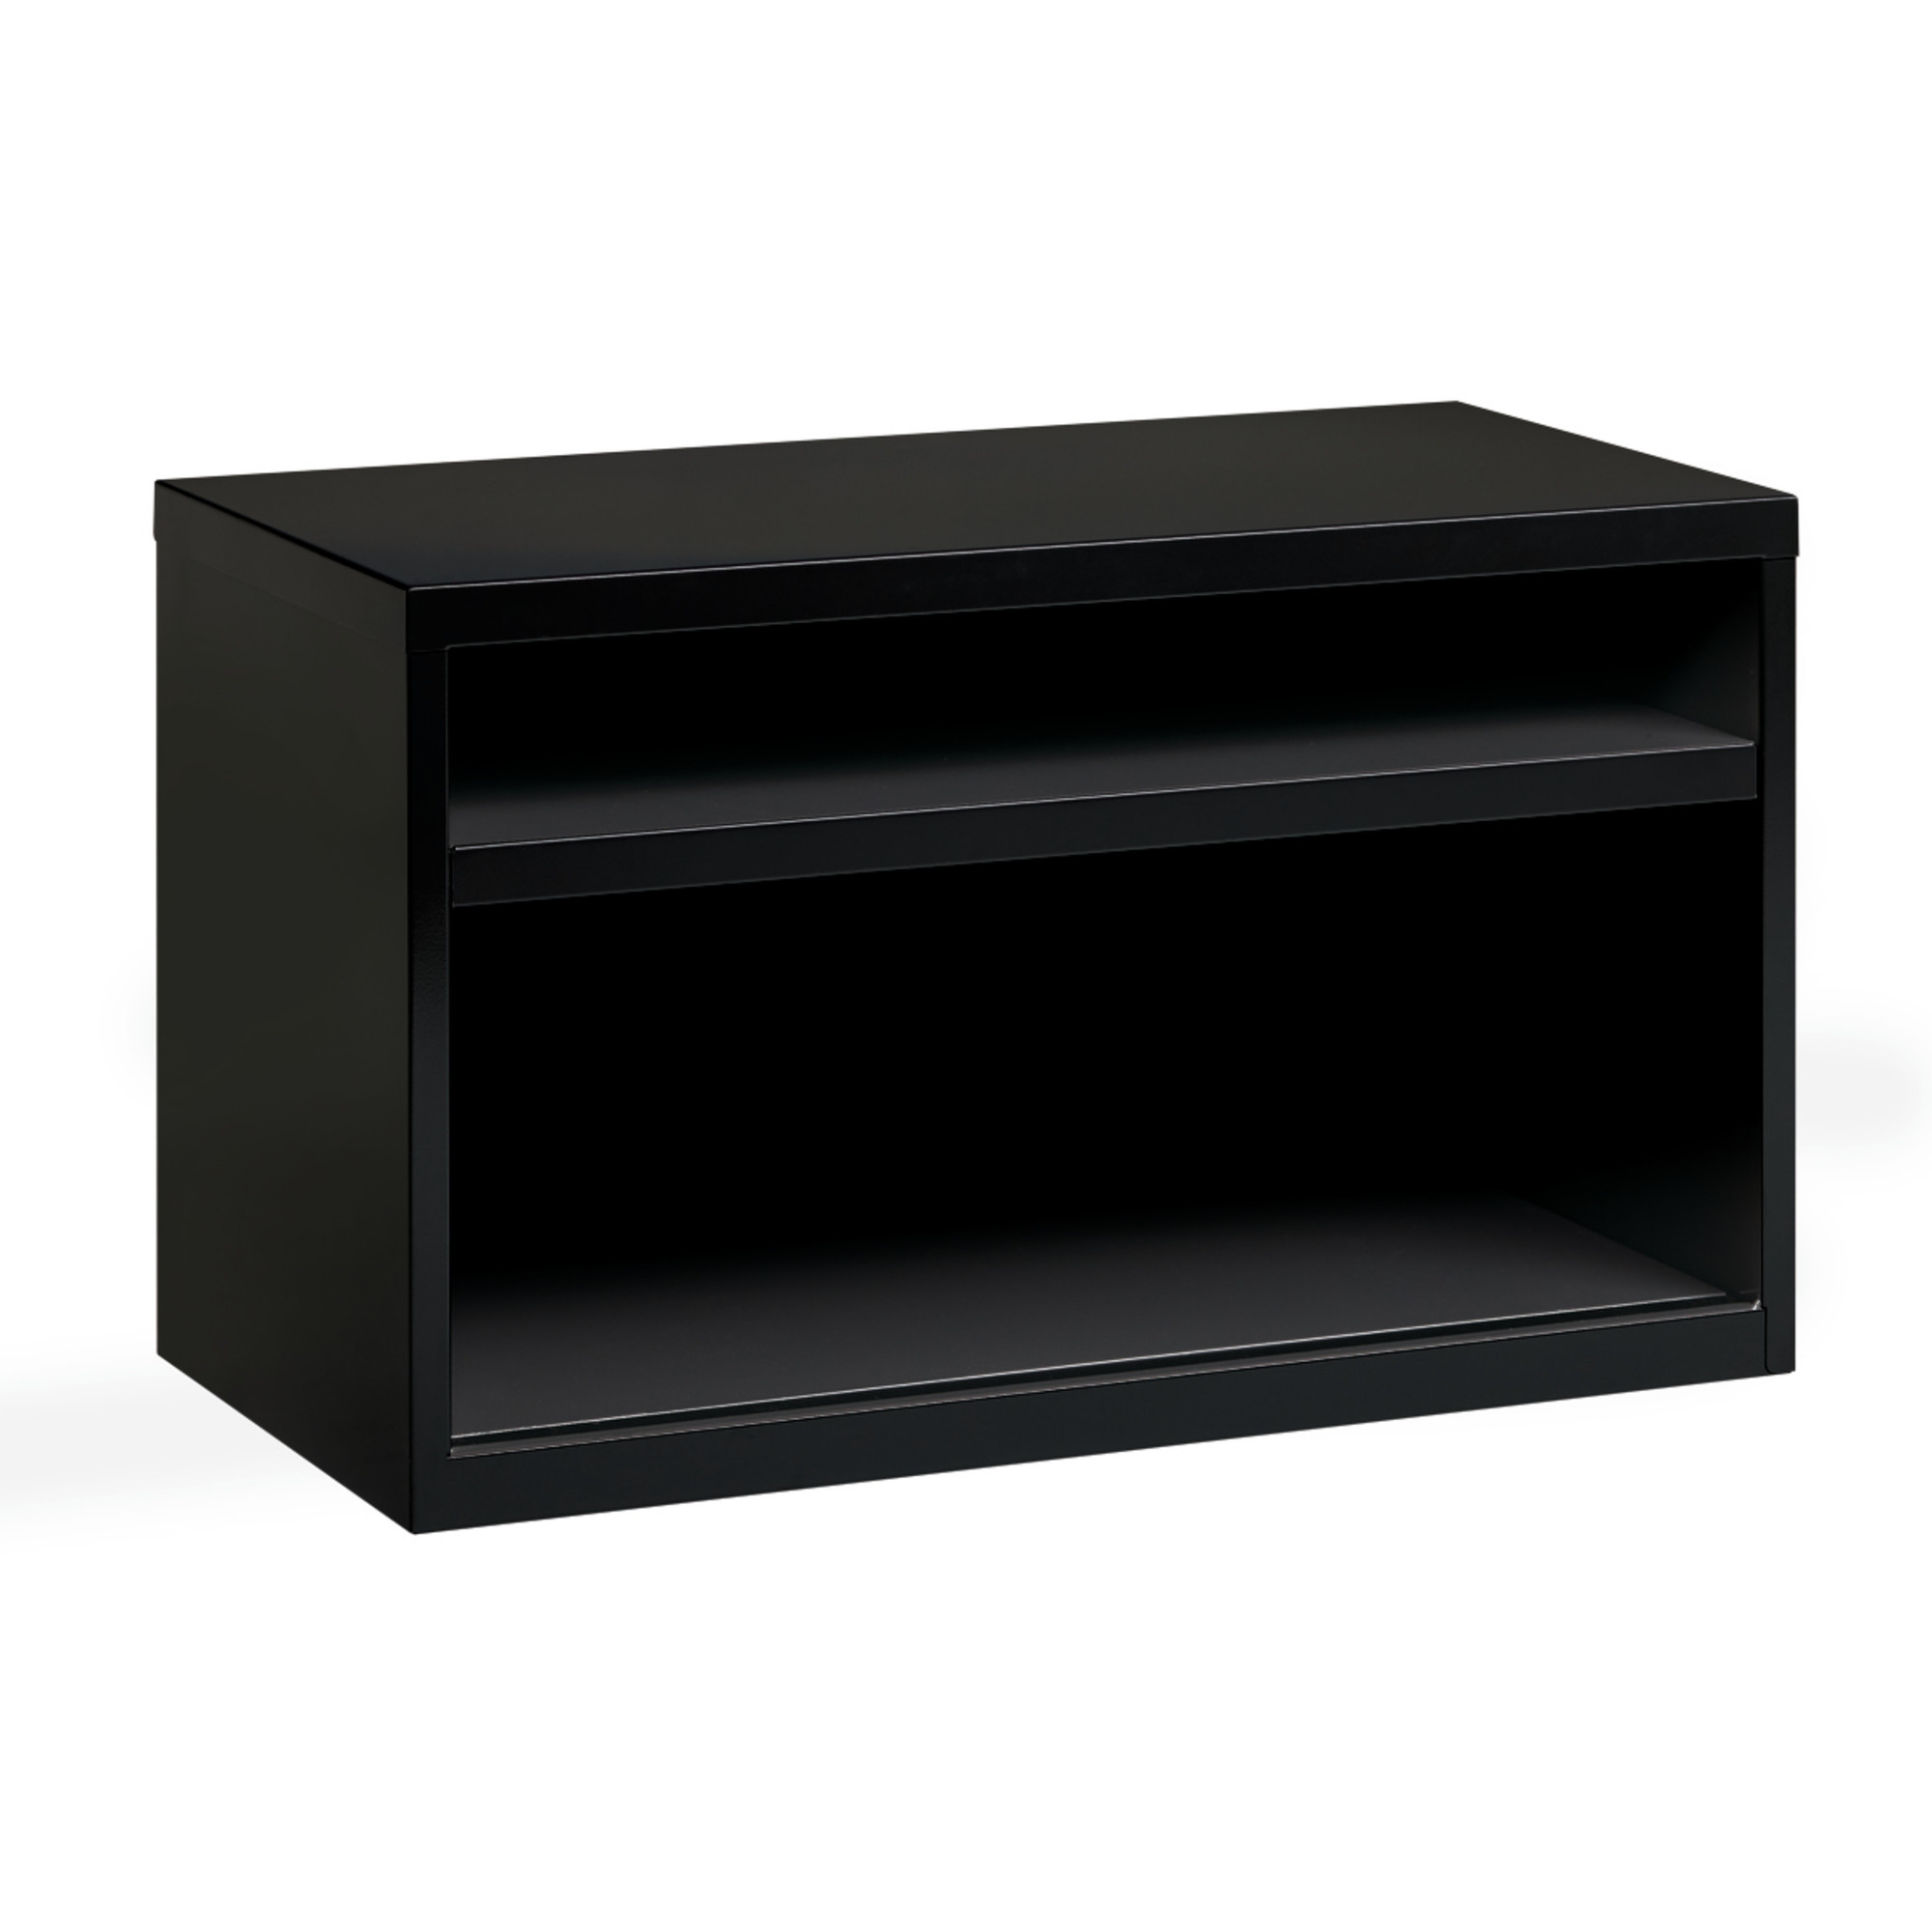 Hirsh Industries, Credenza Lateral Cabinet with Open Shelves, Height 22 in, Width 36 in, Model 20508